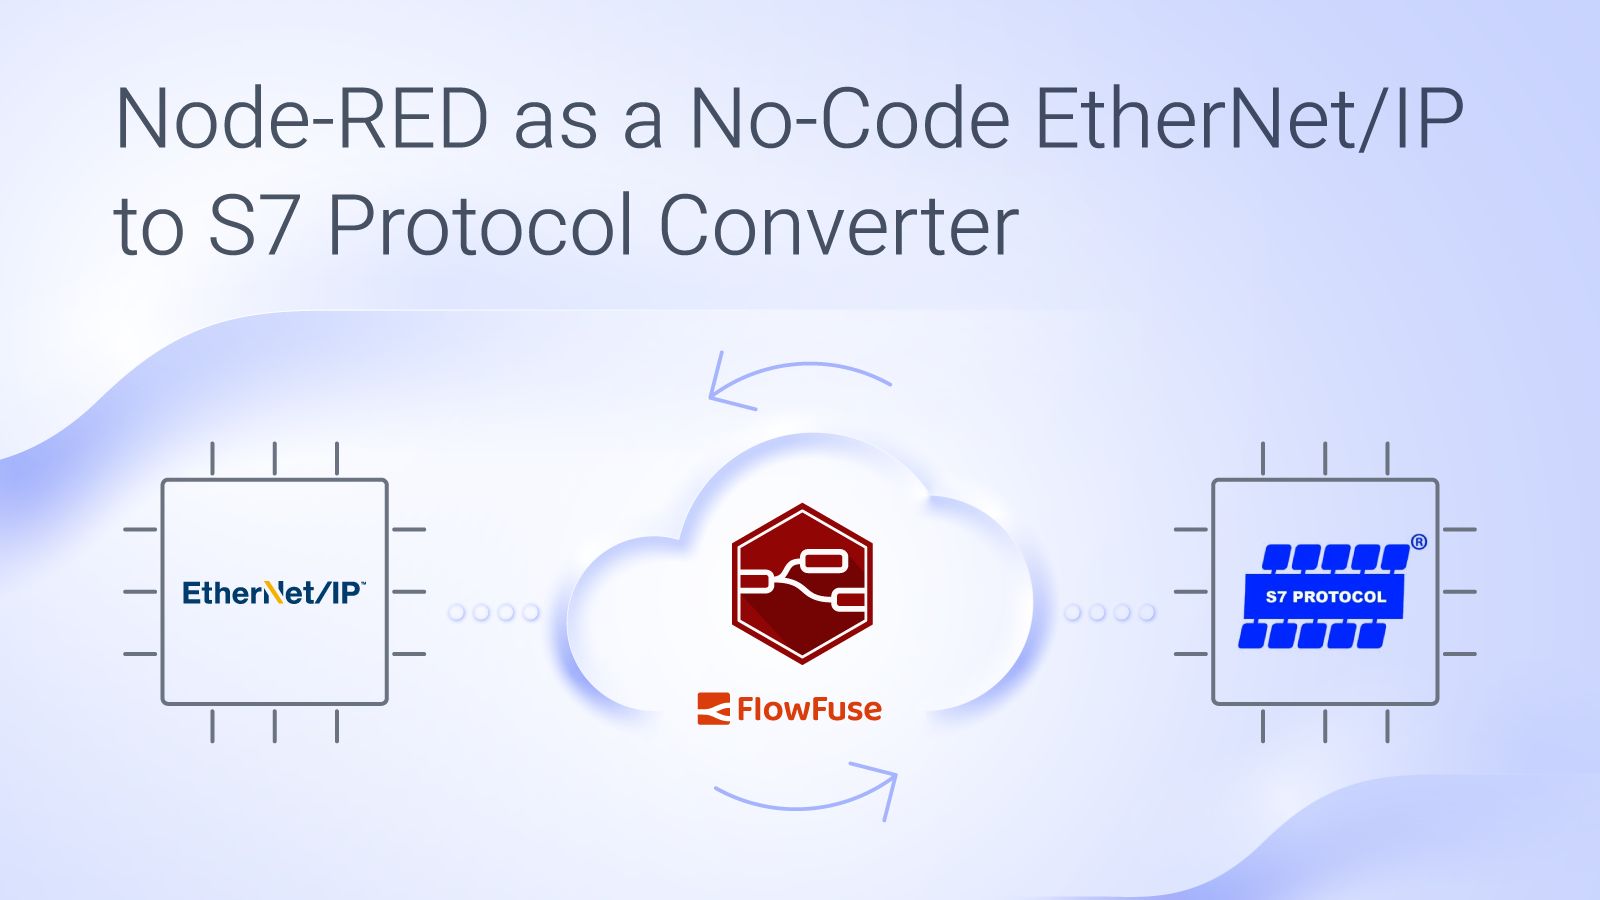 Image representing Node-RED as a No-Code EtherNet/IP to S7 Protocol Converter